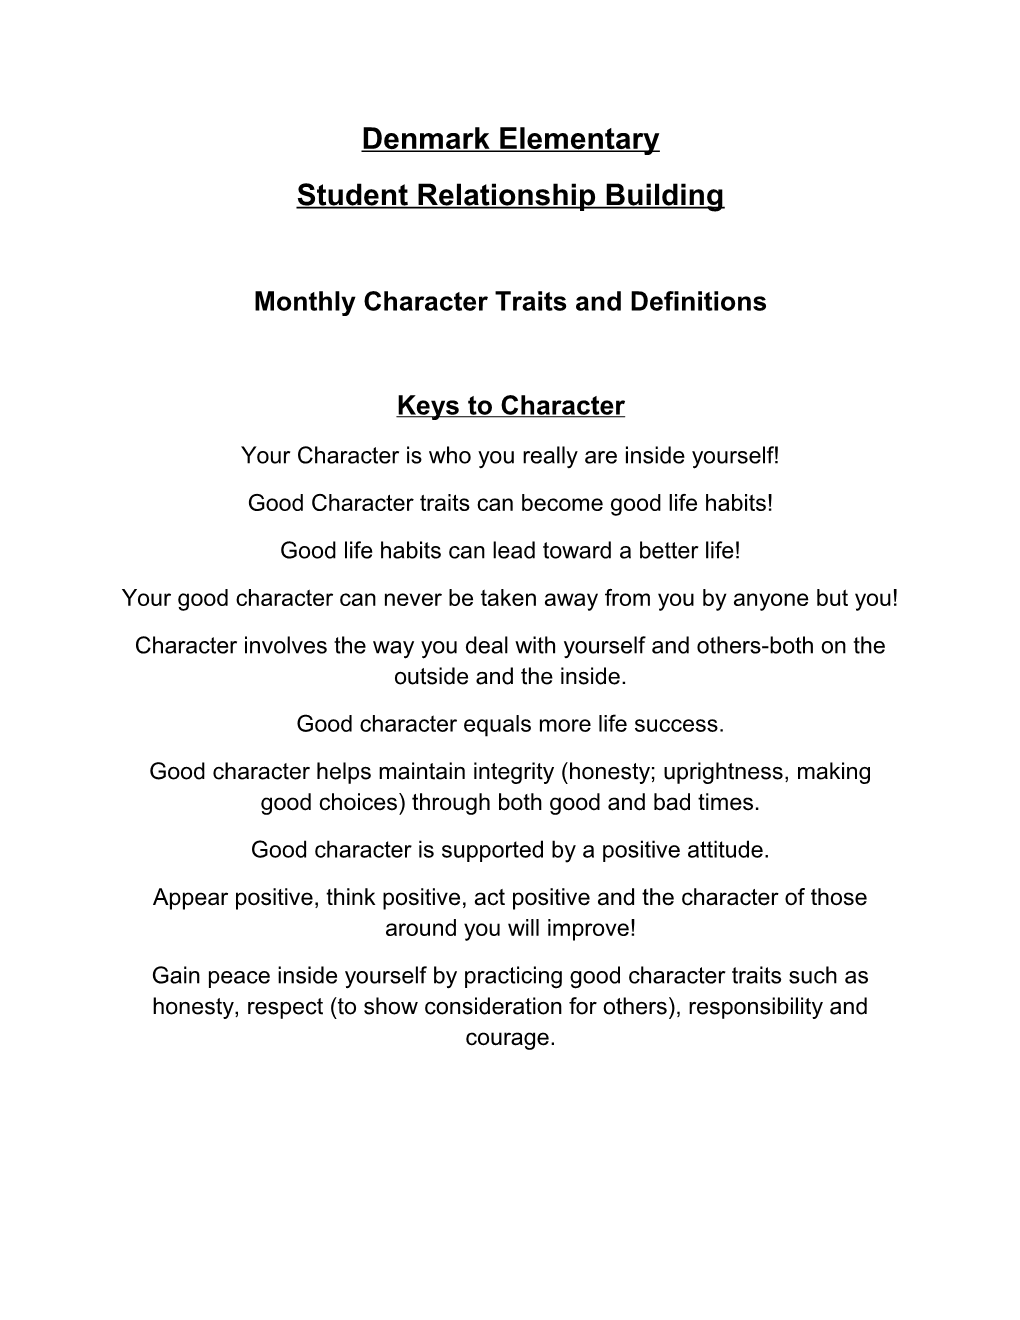 Monthly Character Traits and Definitions